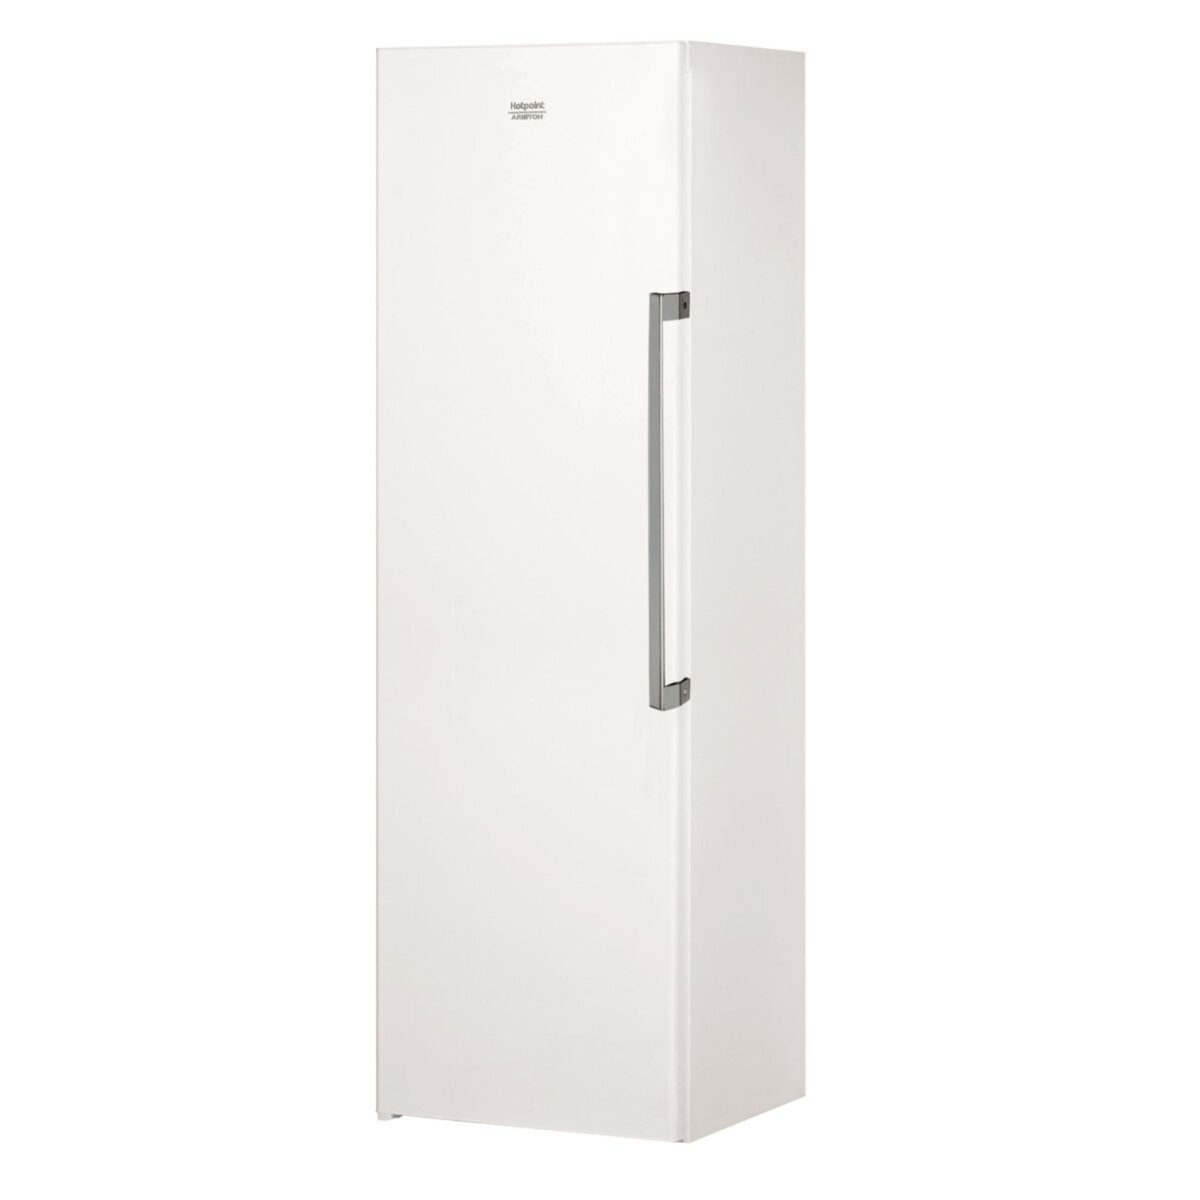 HOTPOINT Congélateur Armoire UH8F1CW, 260 L, Froid No Frost